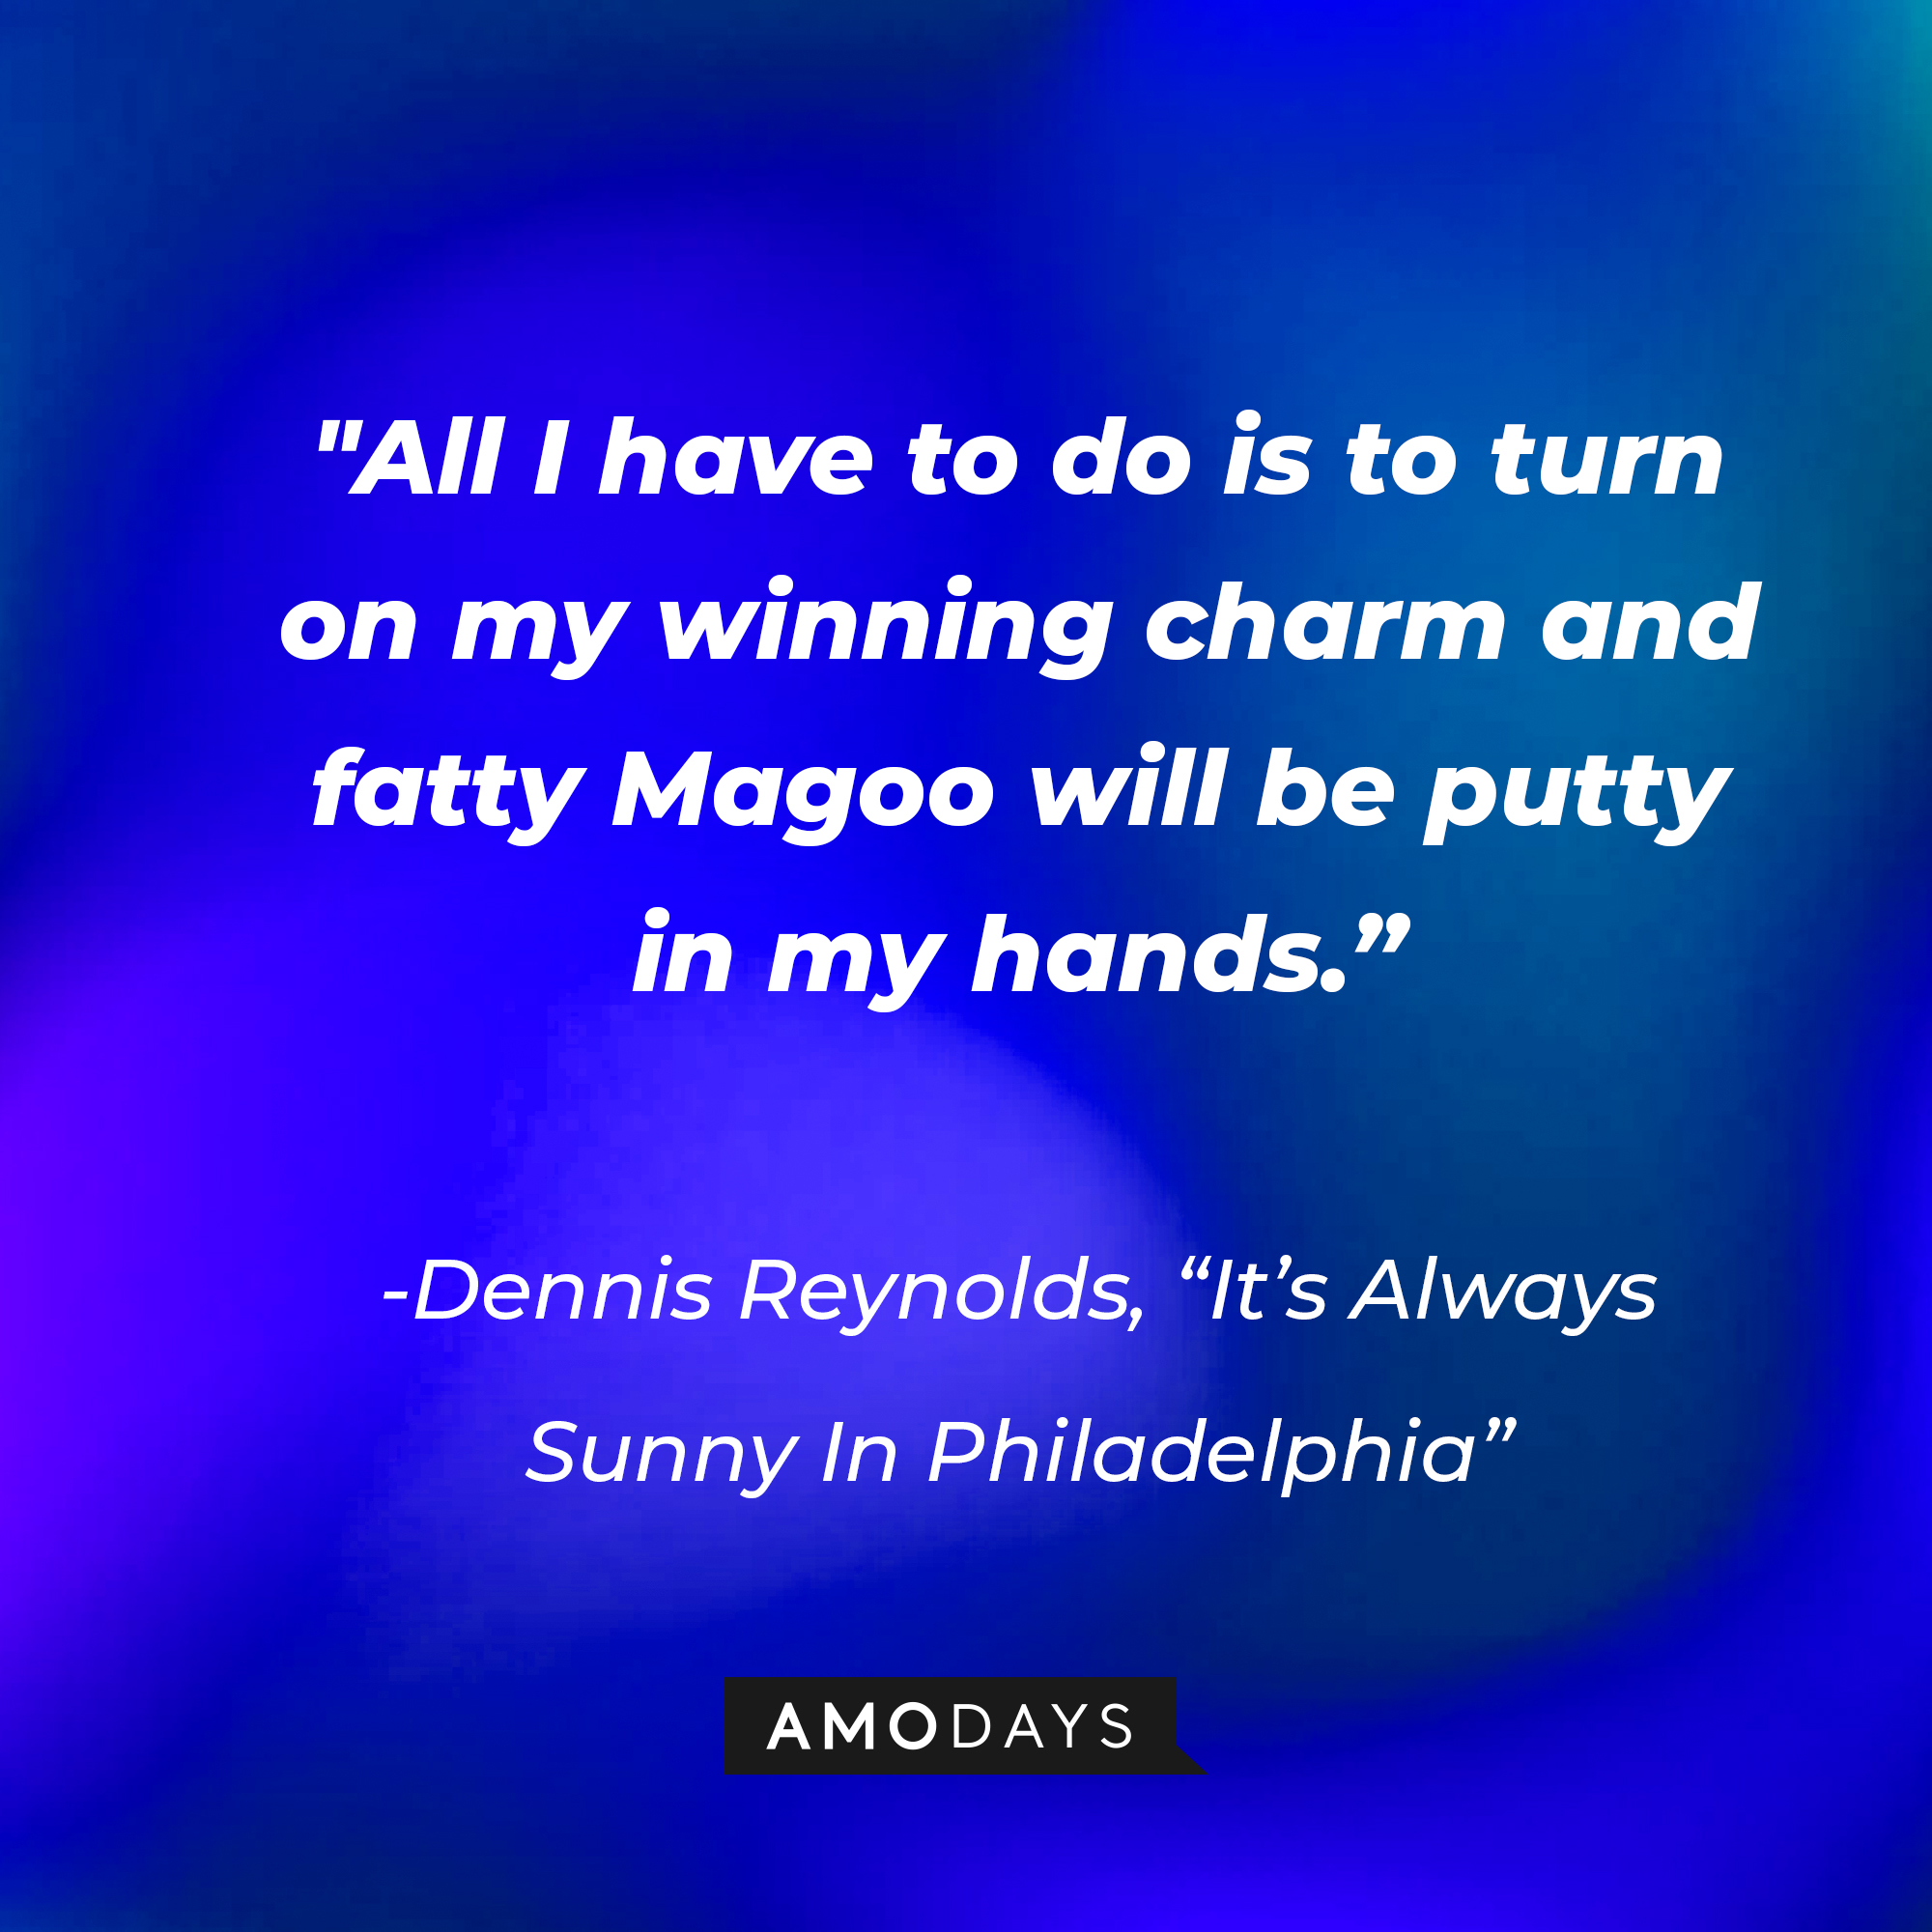 Dennis Reynolds’ quote from "It’s Always Sunny In Philadelphia": “All I have to do is to turn on my winning charm and fatty Magoo will be putty in my hands.” | Source: AmoDays